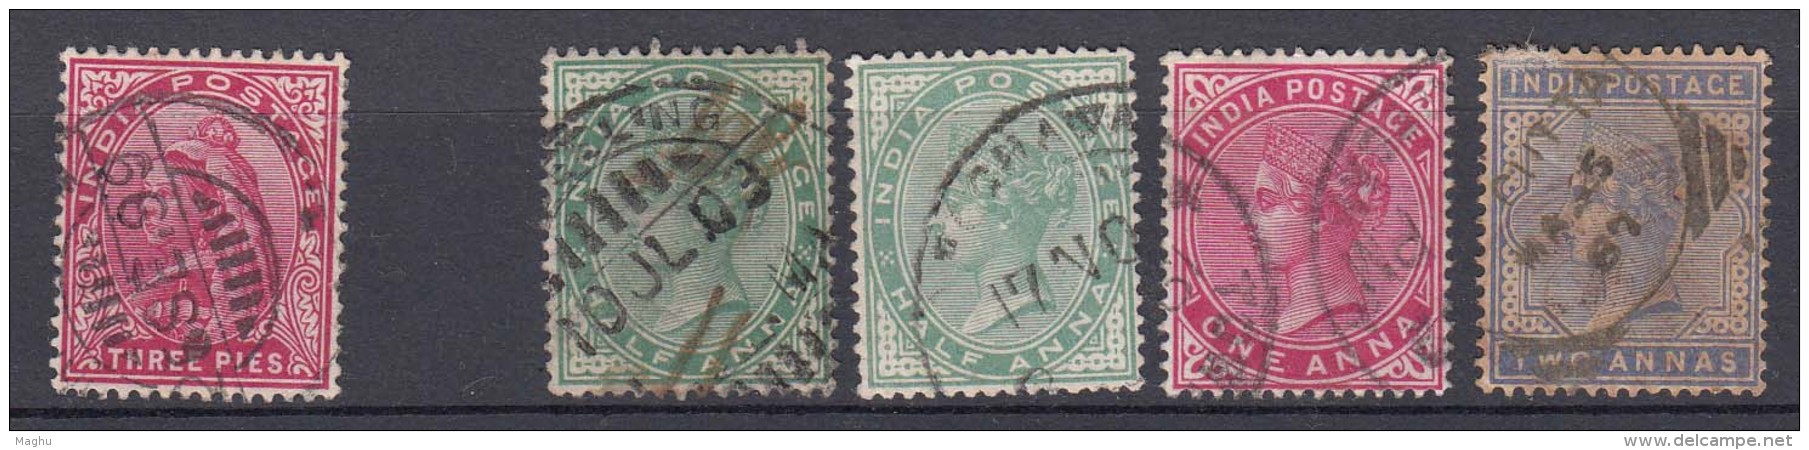 QV Fine Used Catalog &pound;425+,  British East India, Crown Colony And Empire, 1856, 1865, 1866, 1868, 1874, 1876, 1862 - 1854 Britse Indische Compagnie